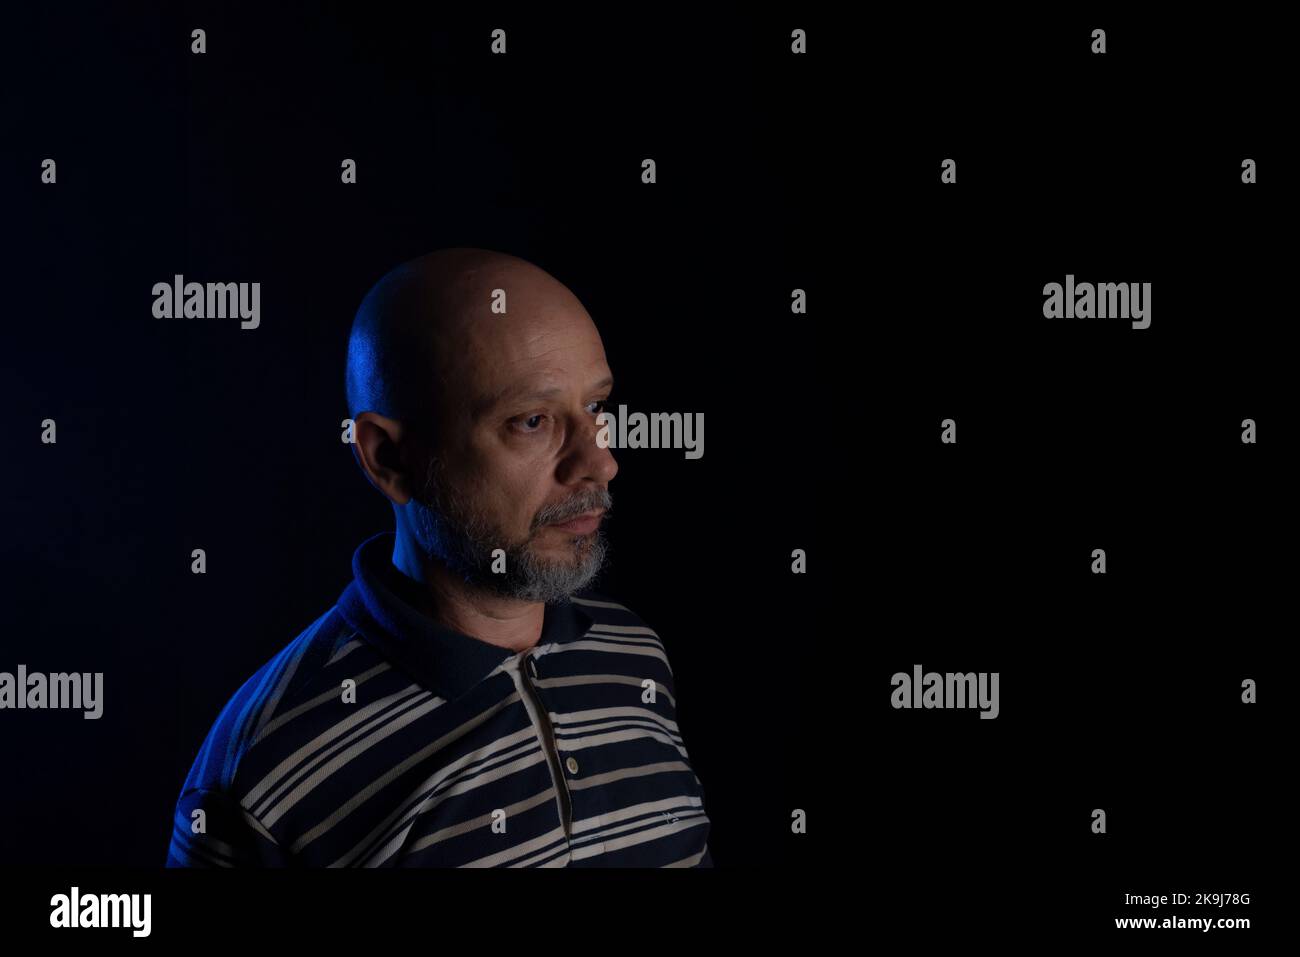 Young handsome bald man with beard wearing casual shirt over black background. Thinking worried. Thoughtful. Stock Photo